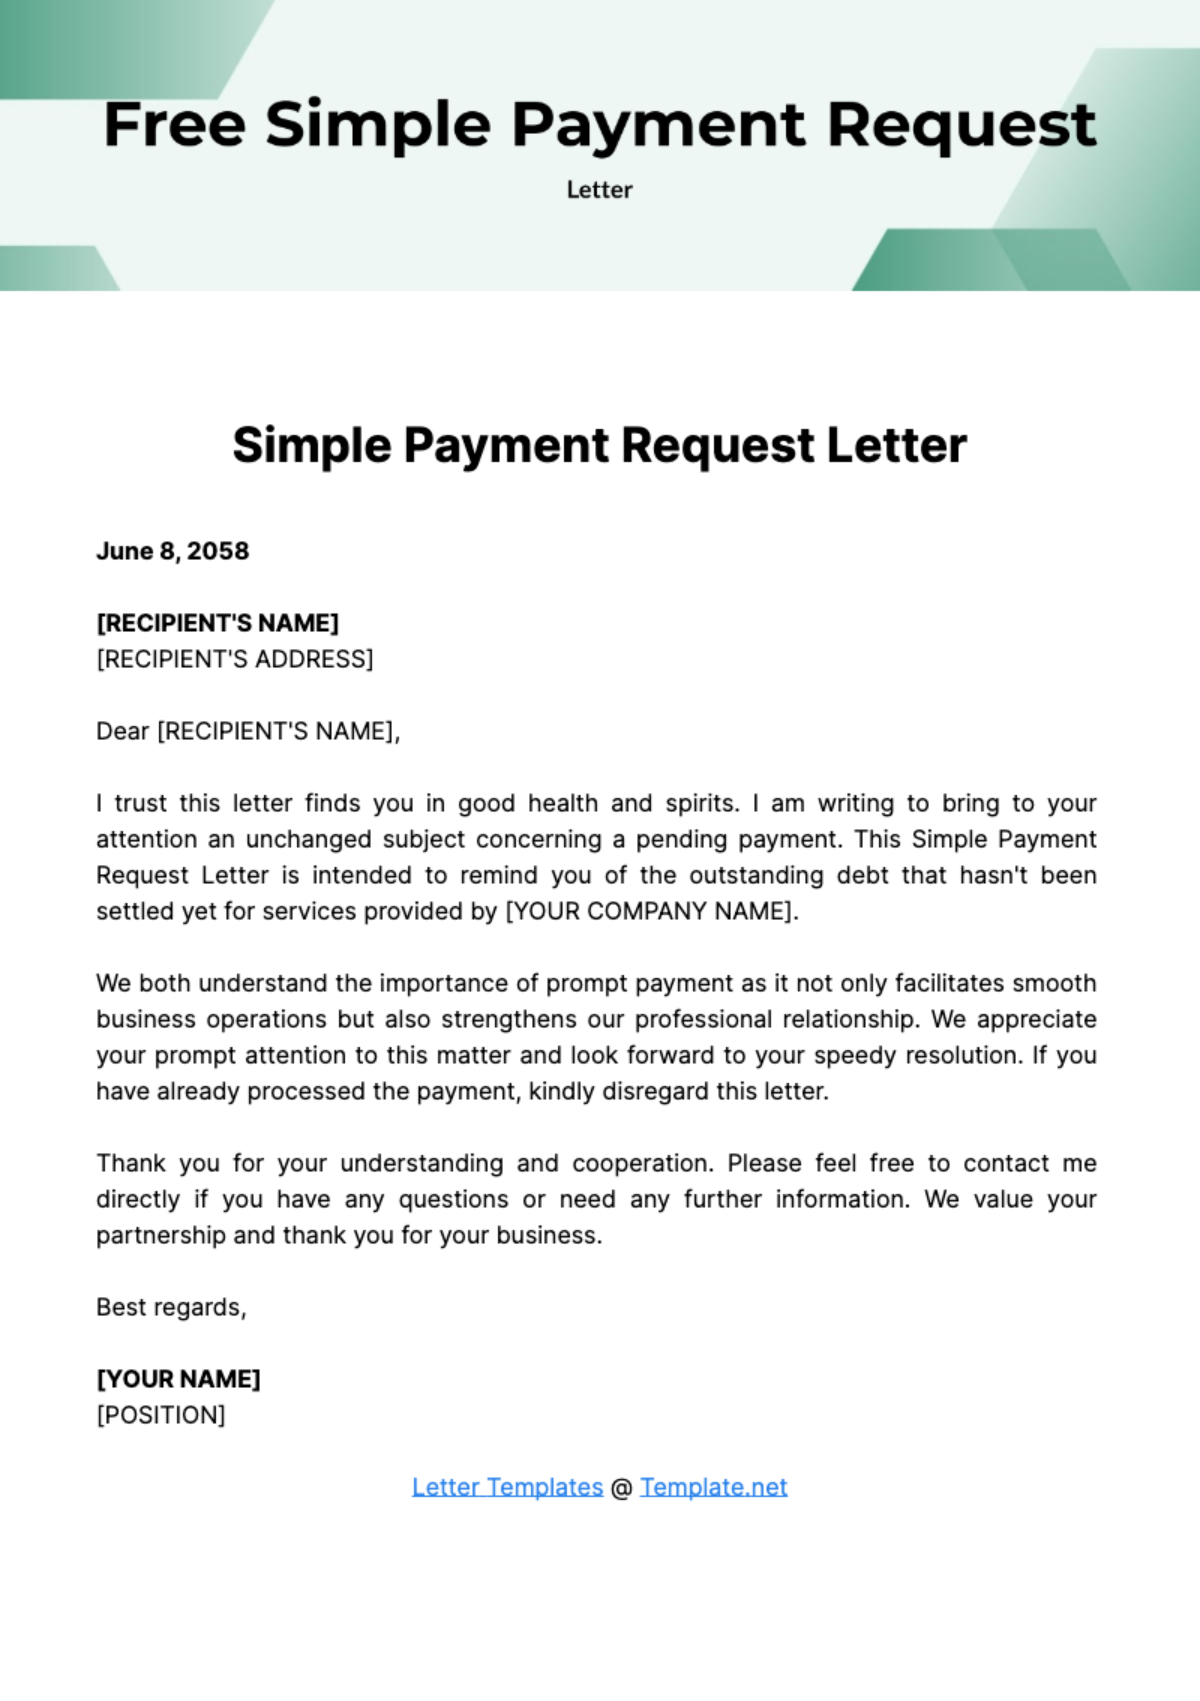 Simple Payment Request Letter Template